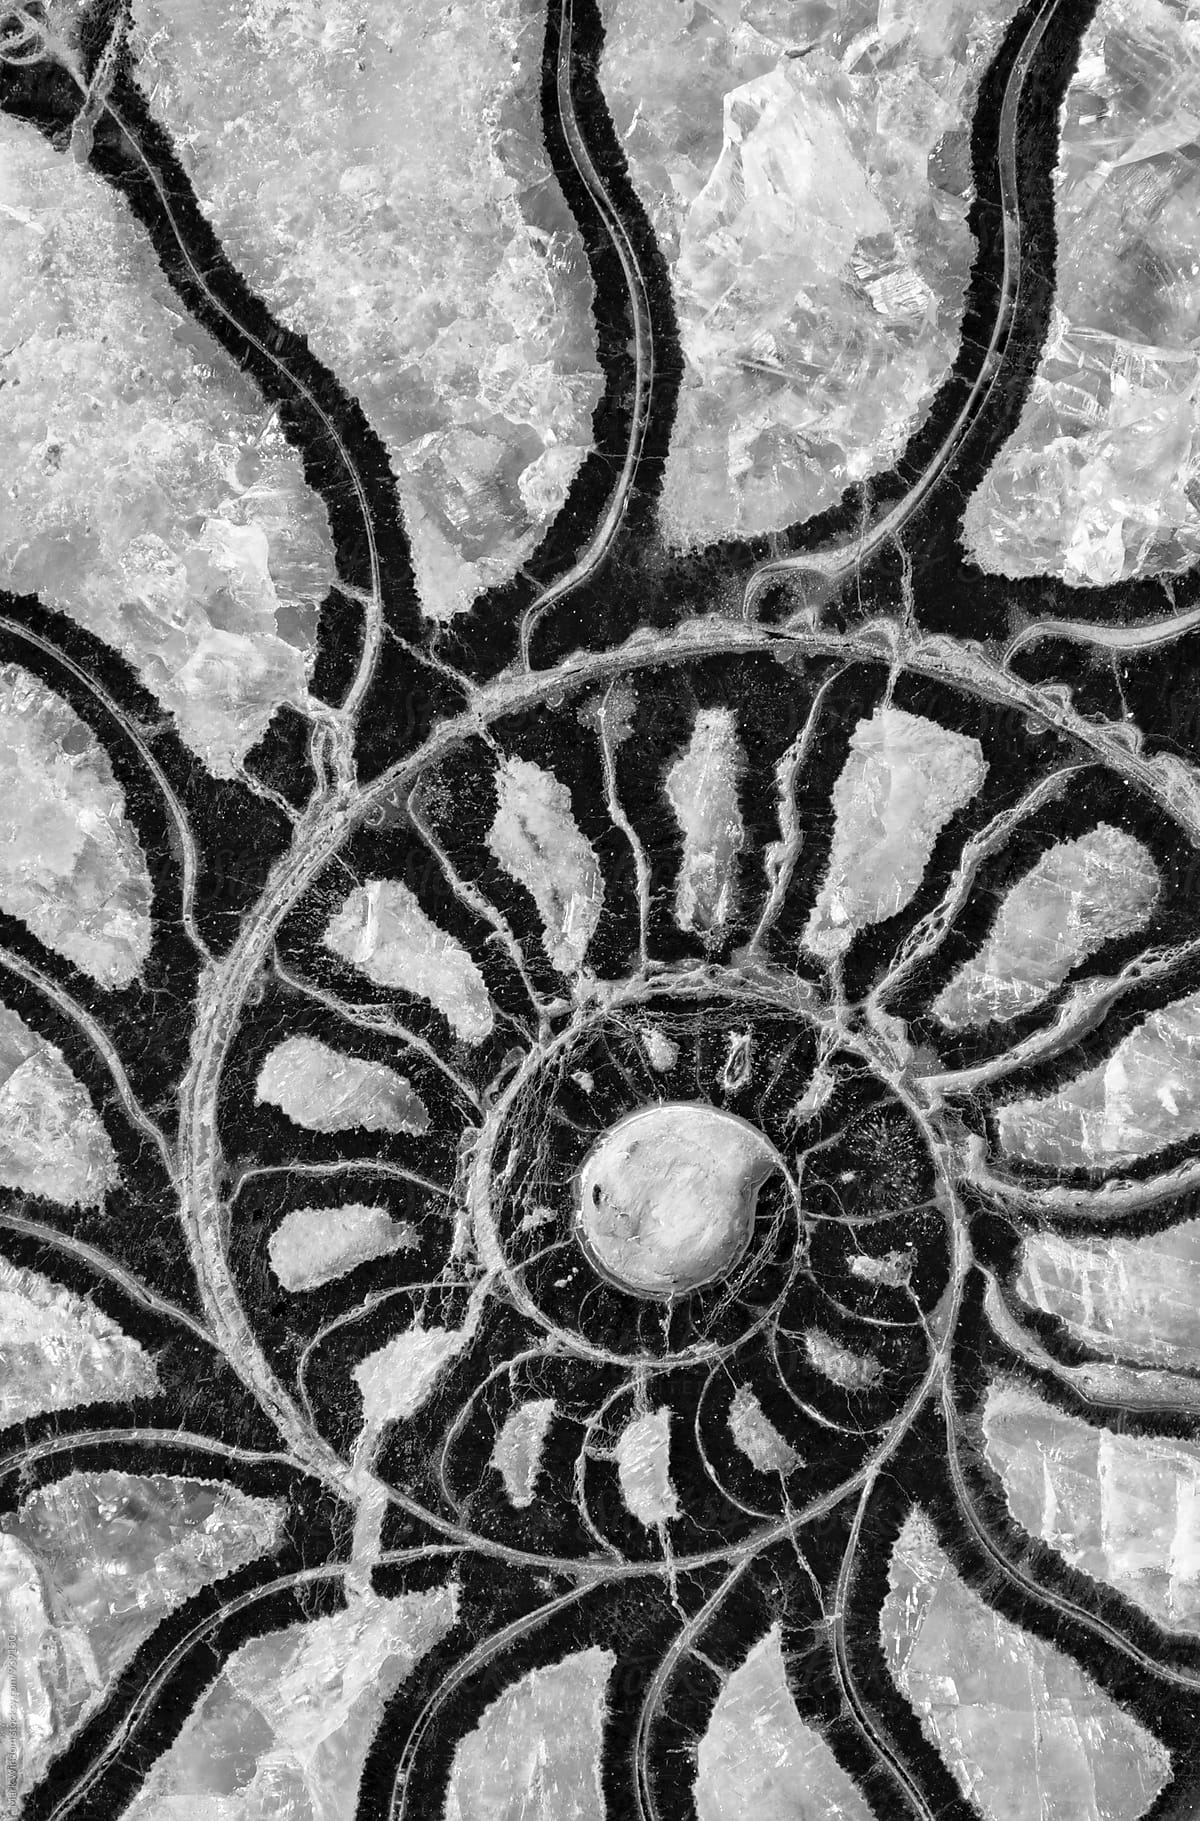 Ammonite fossil in black and white